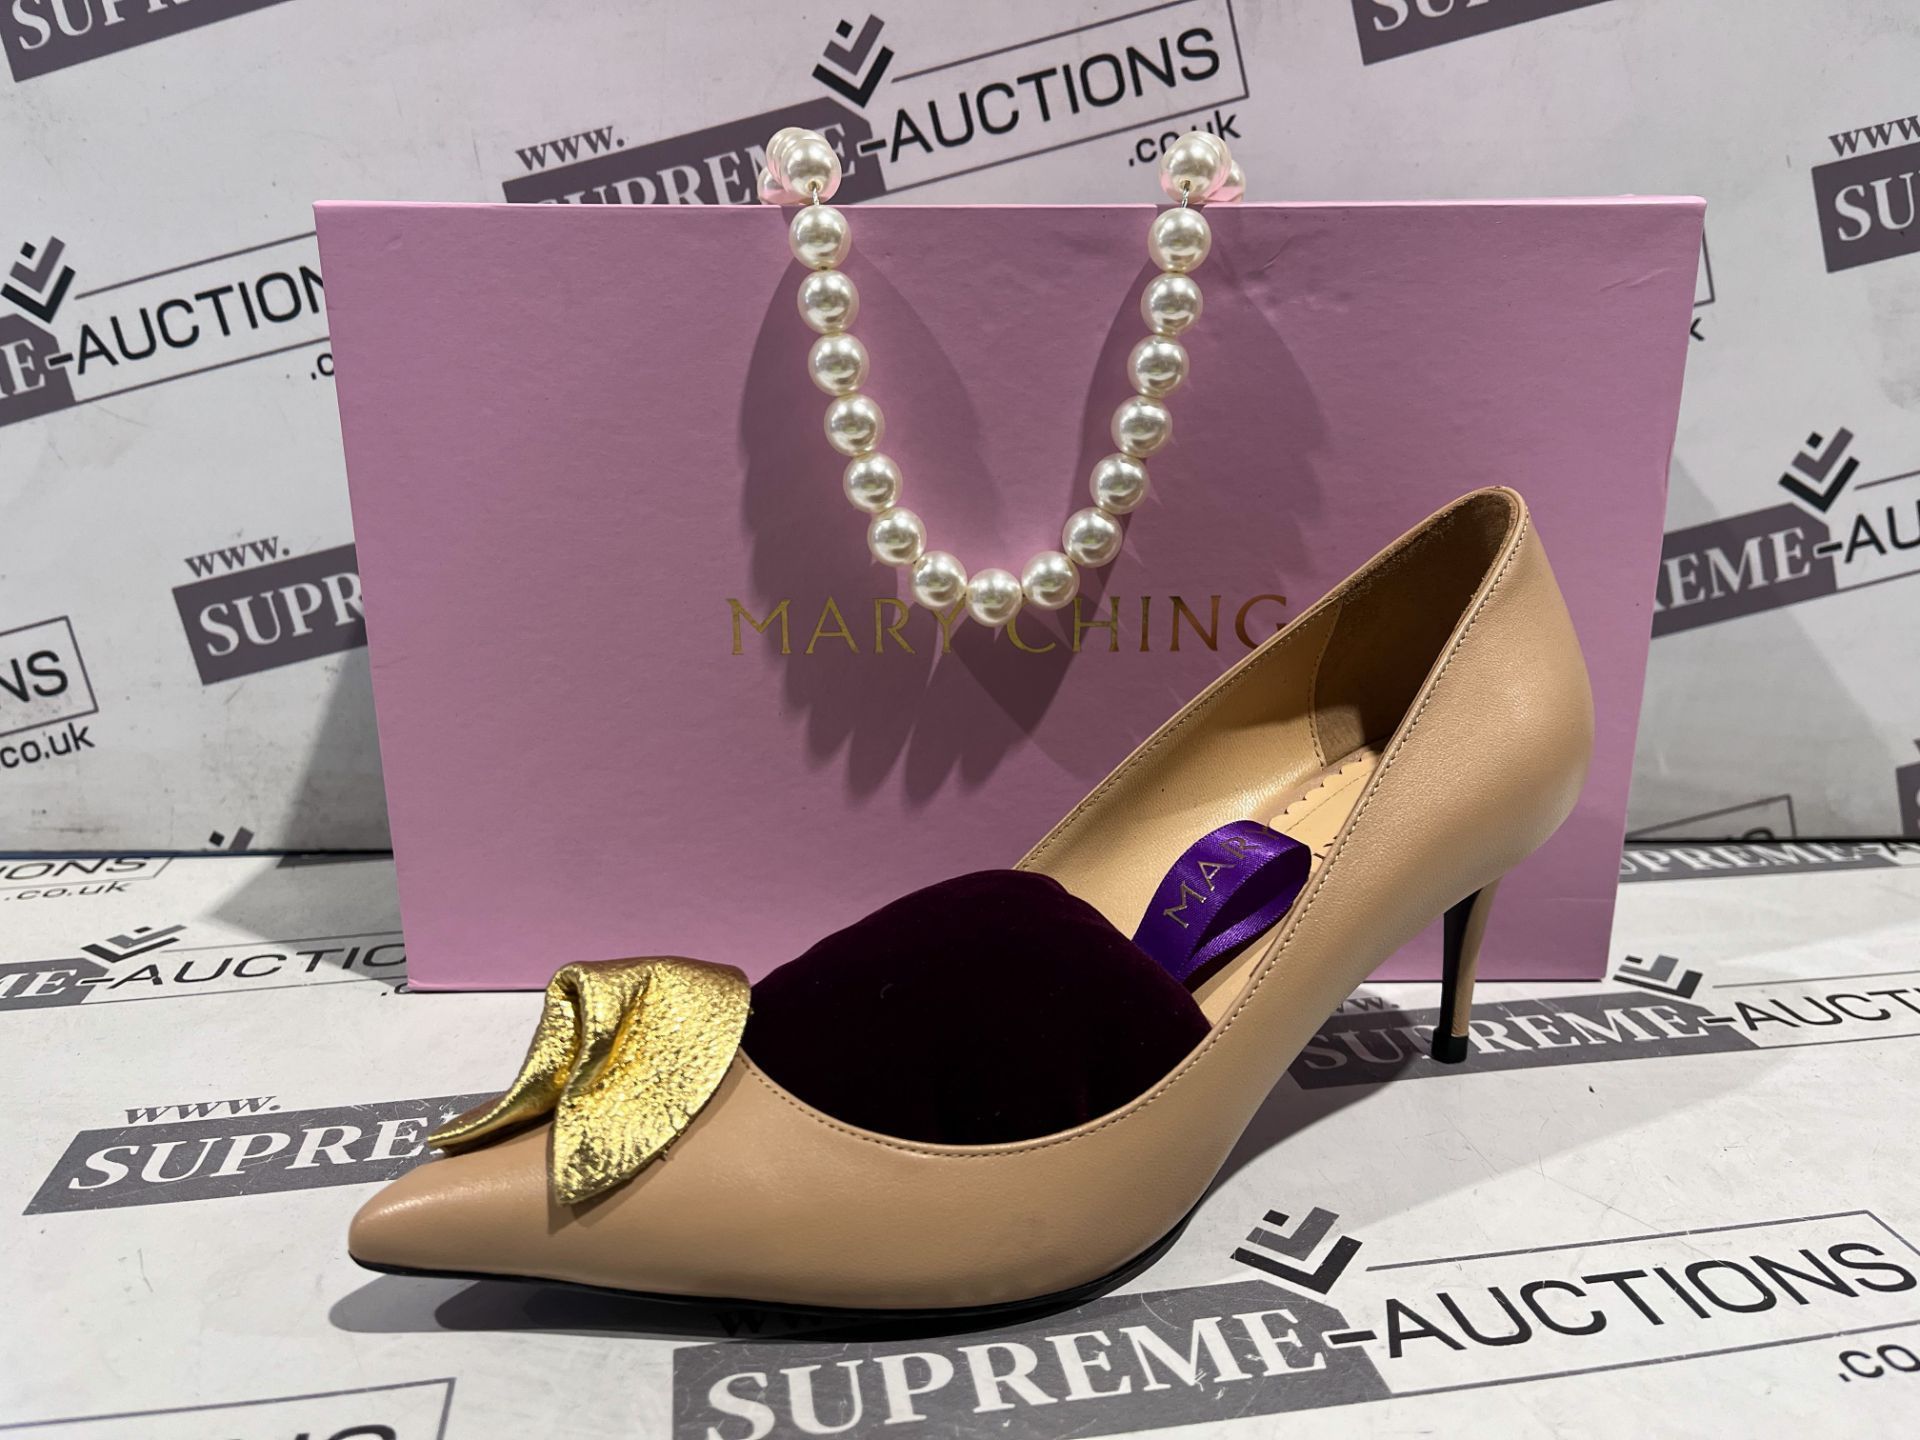 TRADE LOT 10 X NEW & BOXED OFFICIAL MARY CHING LUXURY SHOES IN VARIOUS STYLES AND SIZES - Image 3 of 4